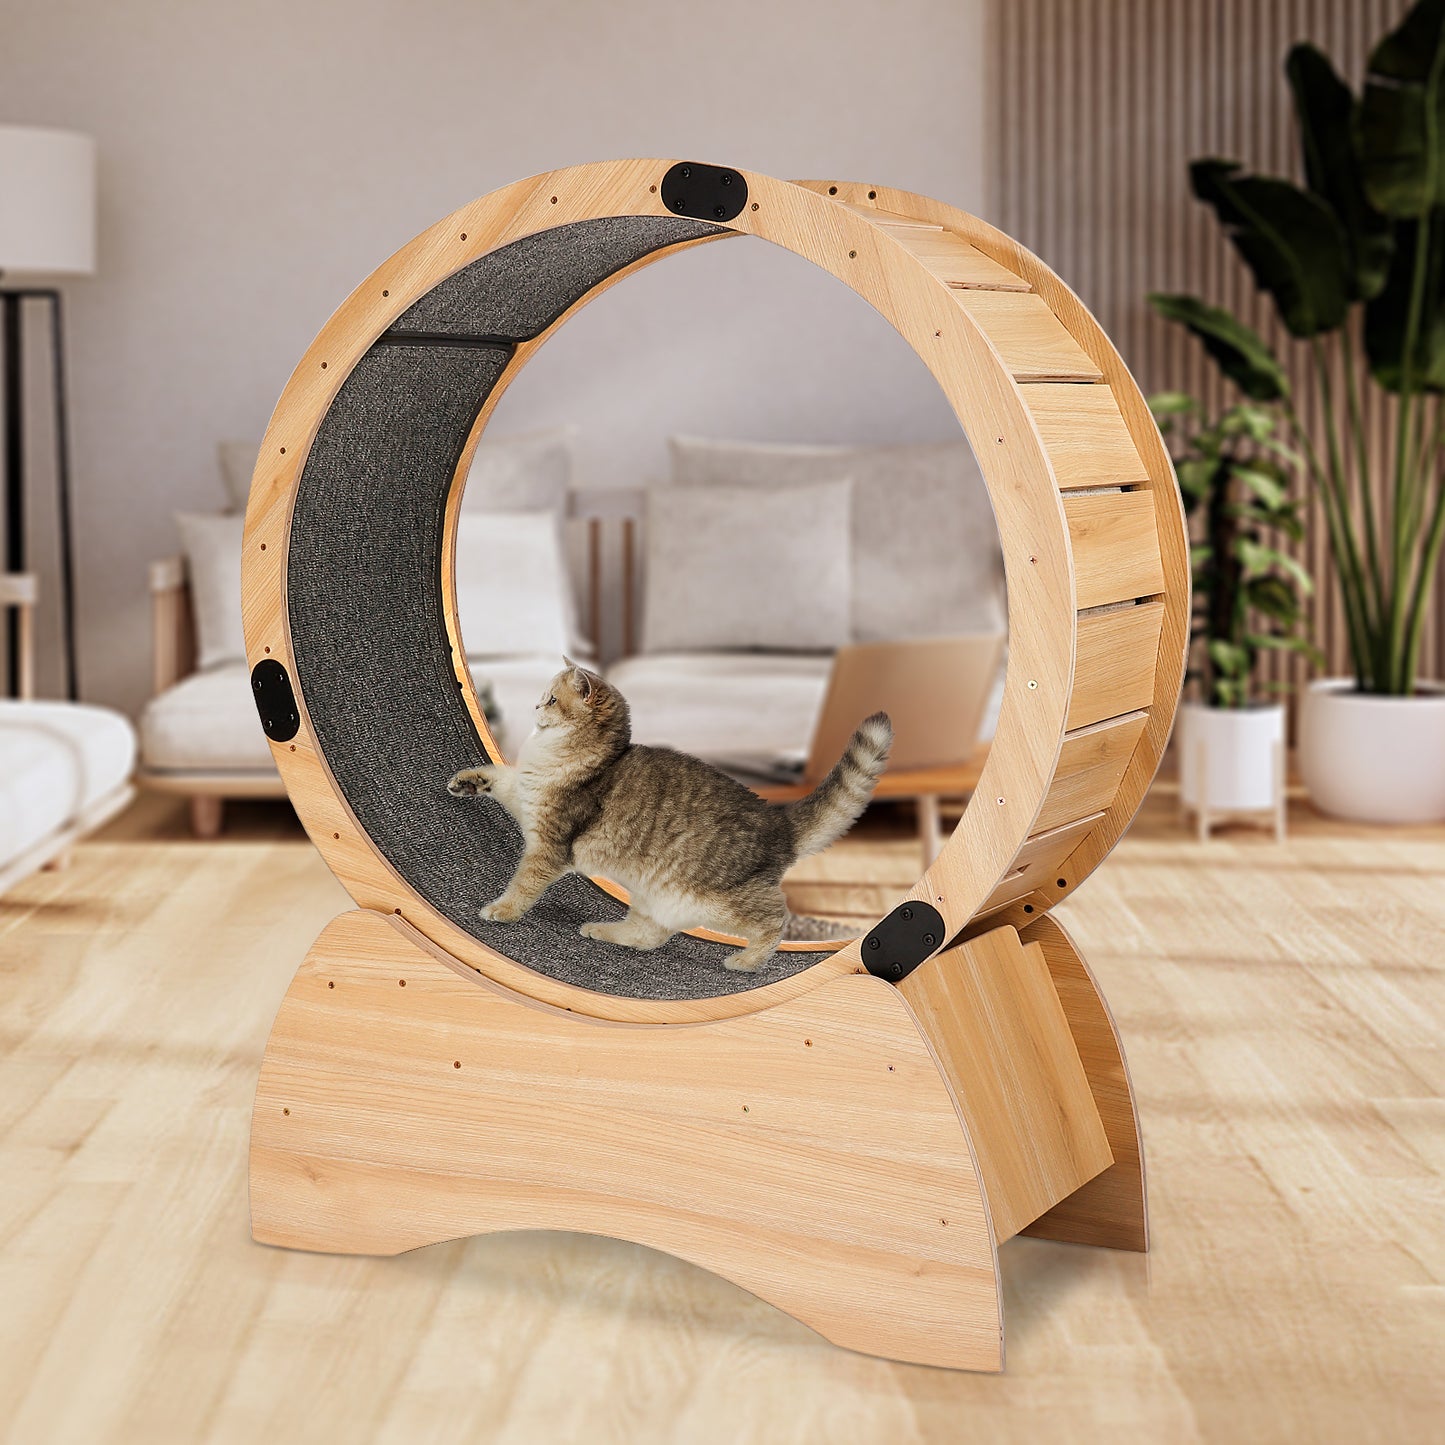 Cat Exercise Wheel – Running, Spinning, and Scratching Fun, Cat Treadmill with Carpeted Runway, Kitty Cat Sport Toy, Great for Physical Activity and Reducing Boredom